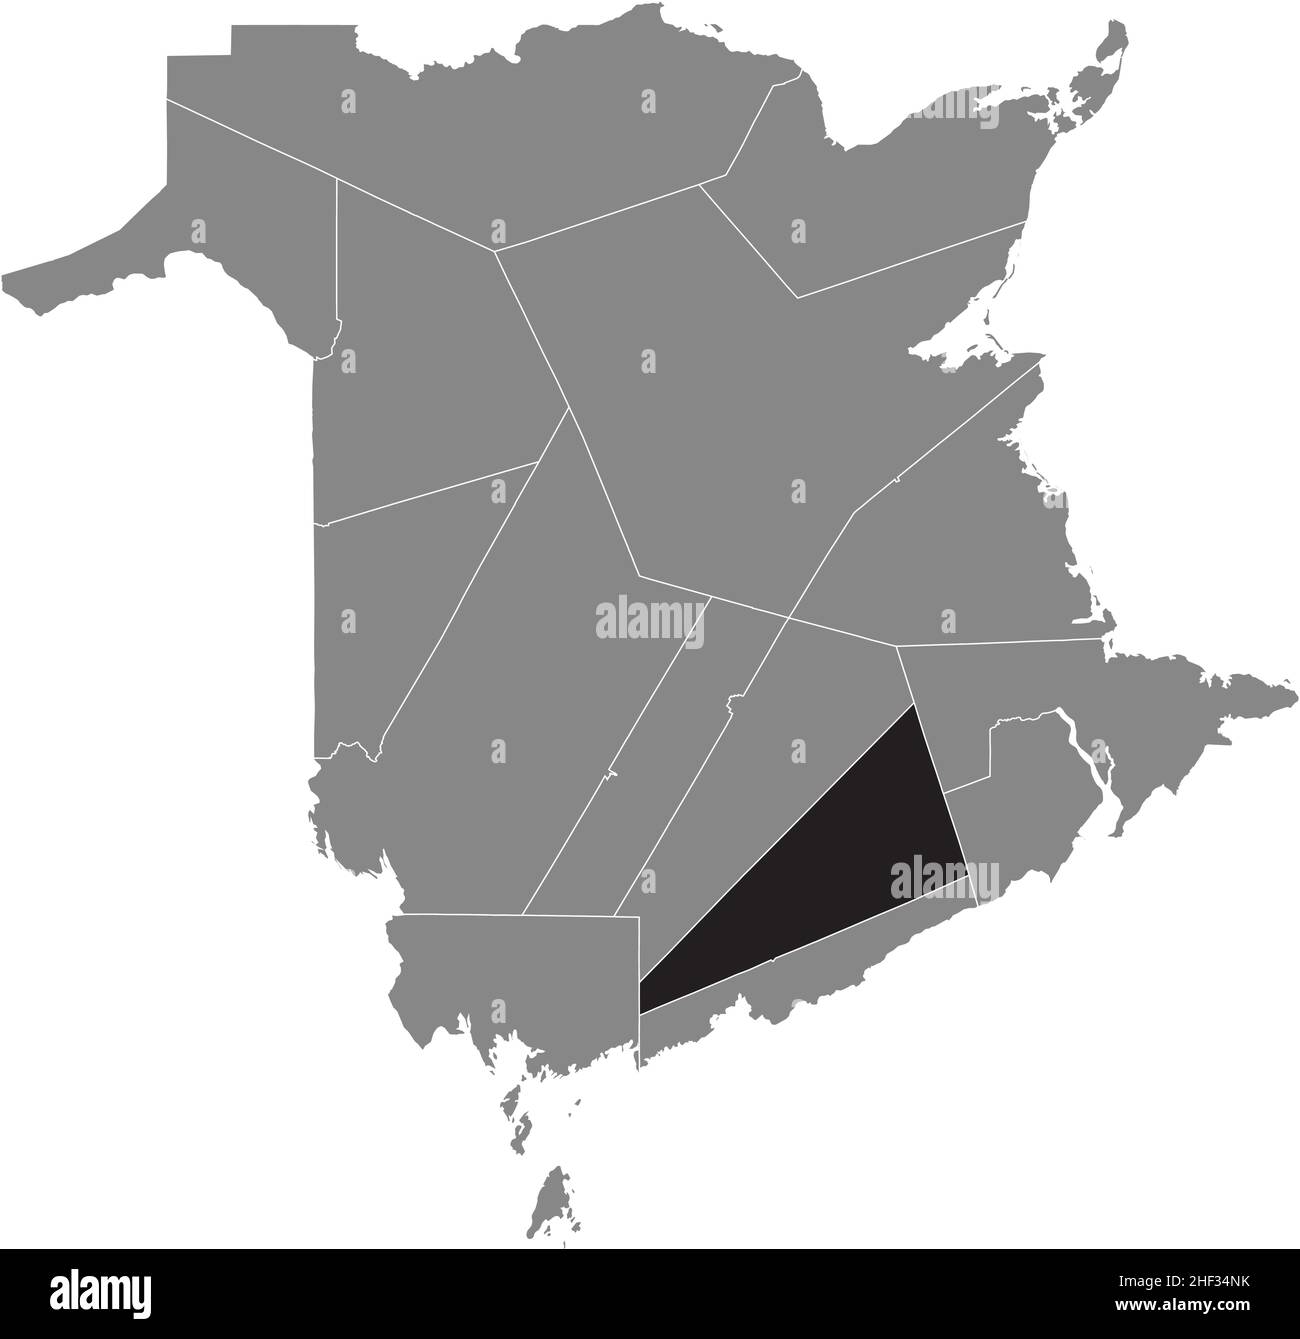 Black flat blank highlighted location map of the KINGS COUNTY inside gray administrative map of counties of Canadian territory of New Brunswick, Canad Stock Vector